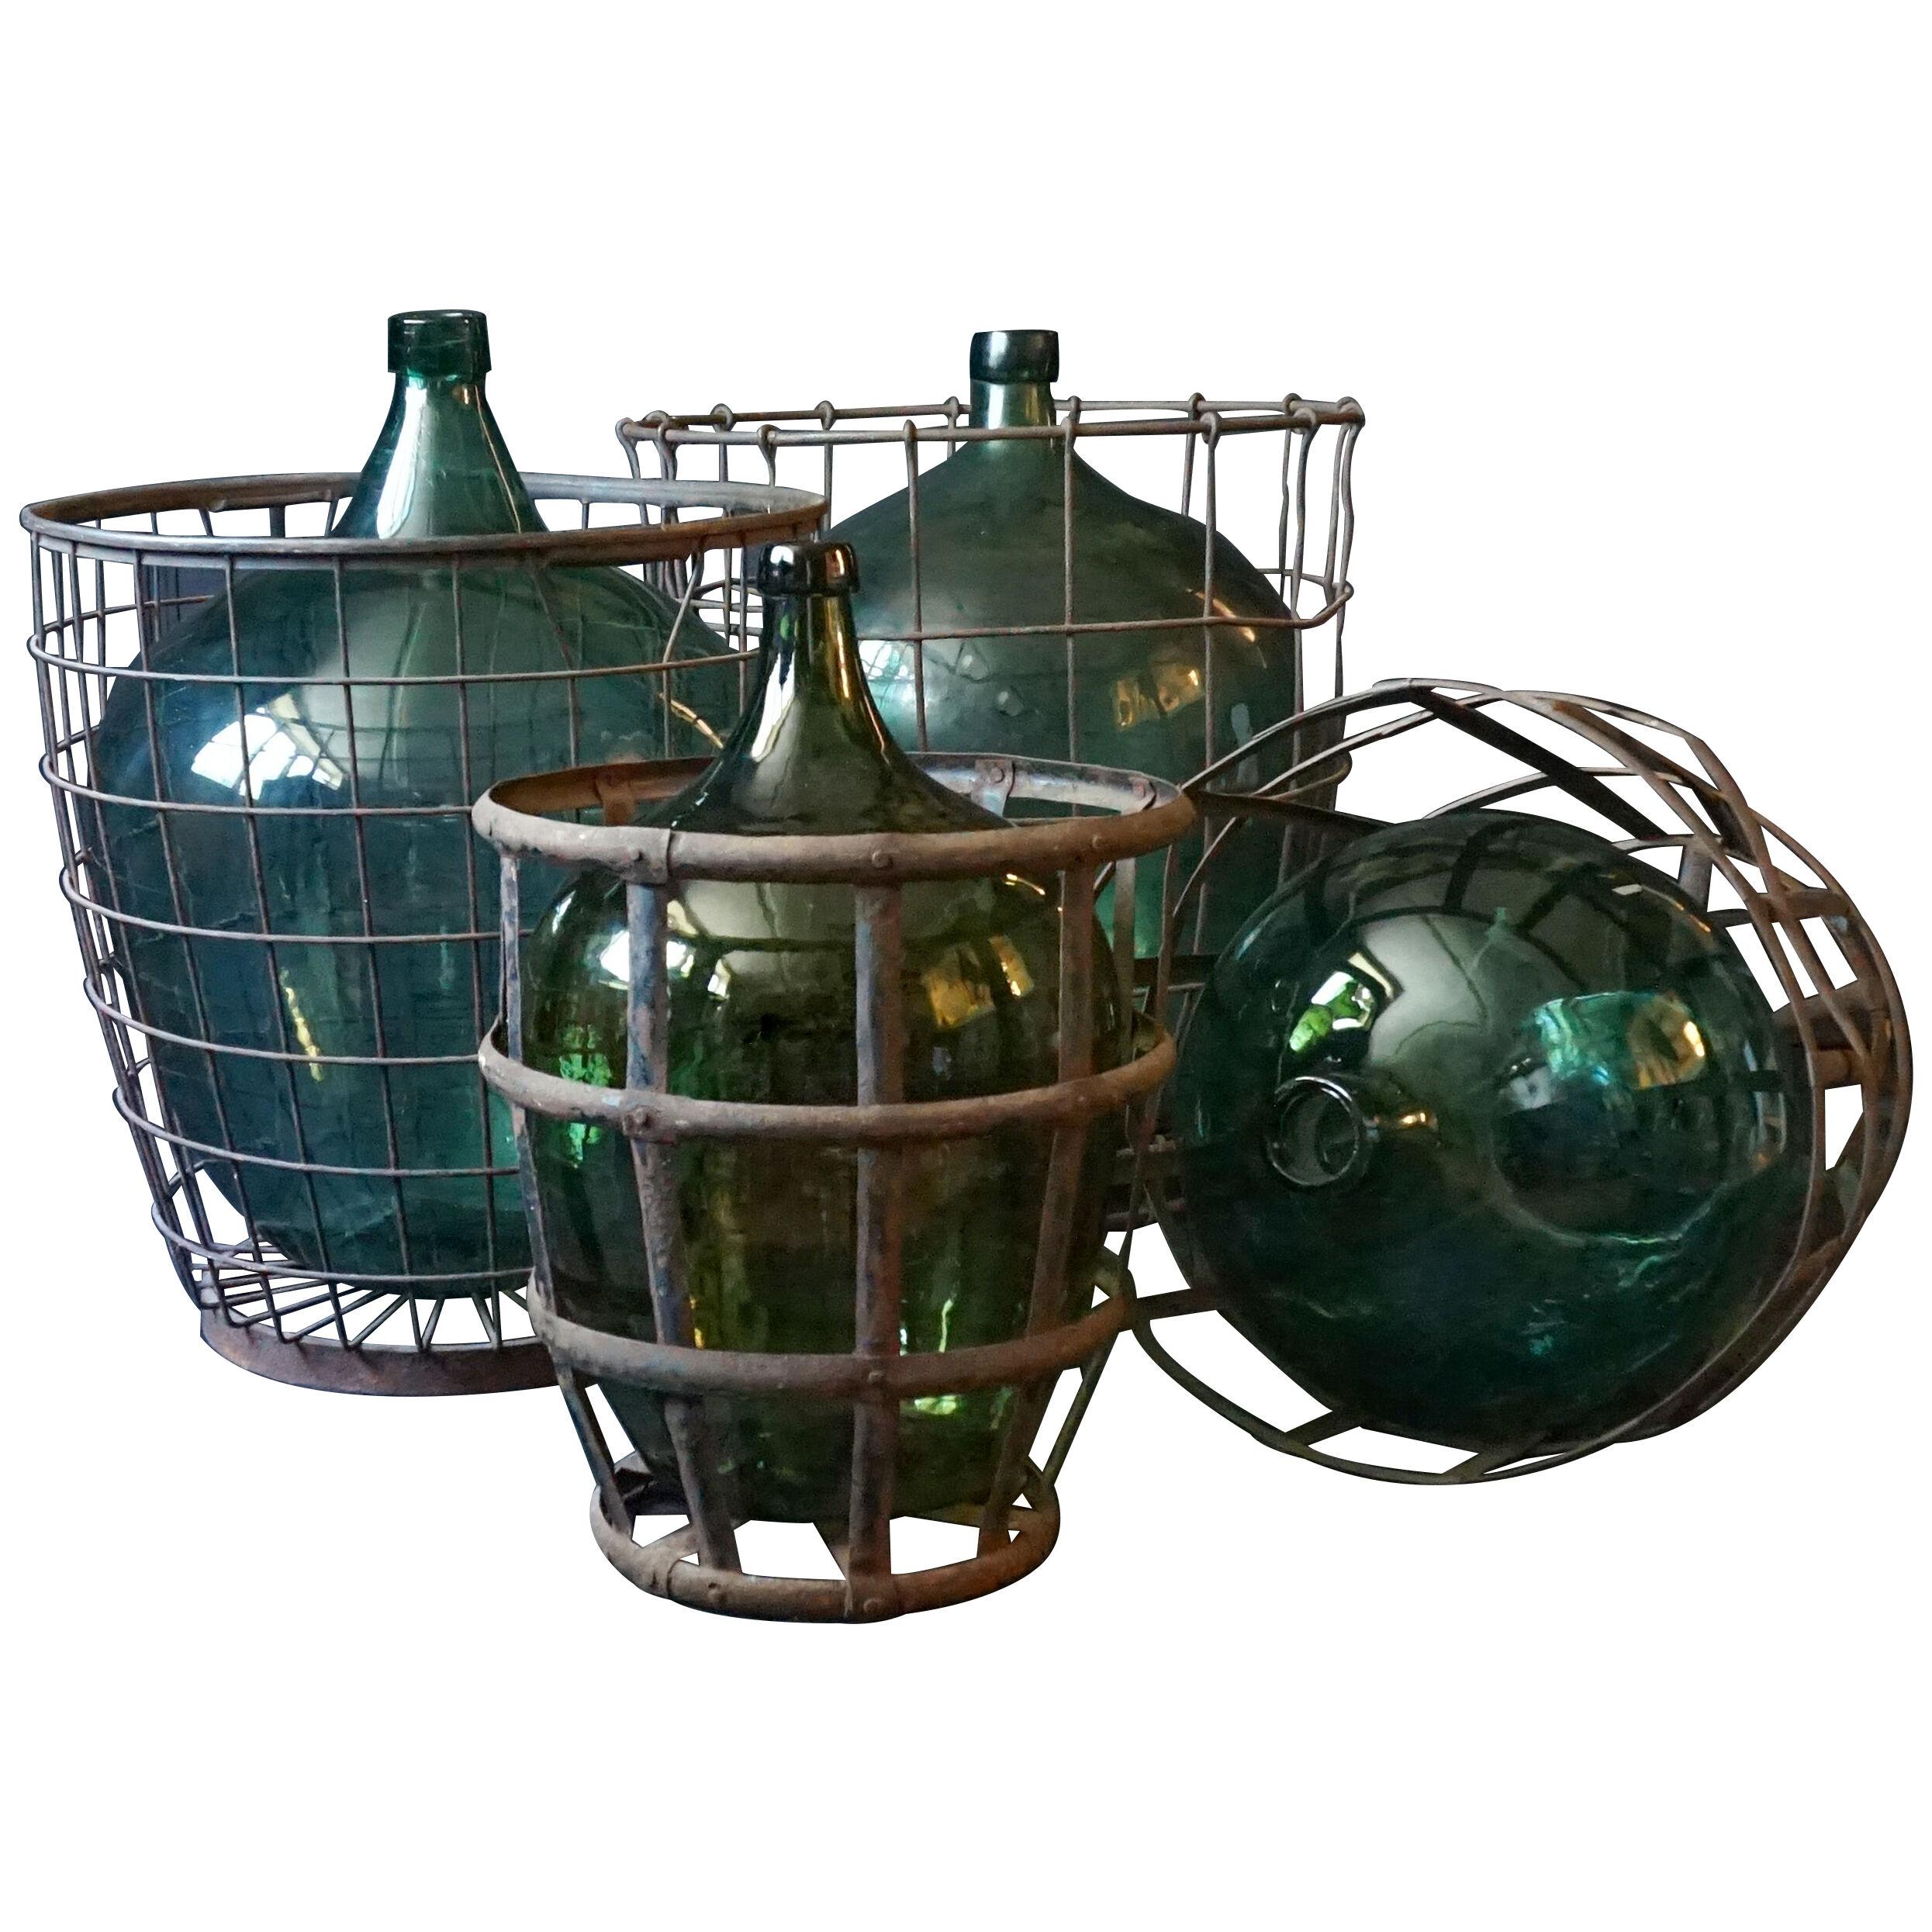 Set of Four 1920s French Green Demijohns, Lady Jeanne or Carboys in Metal Basket